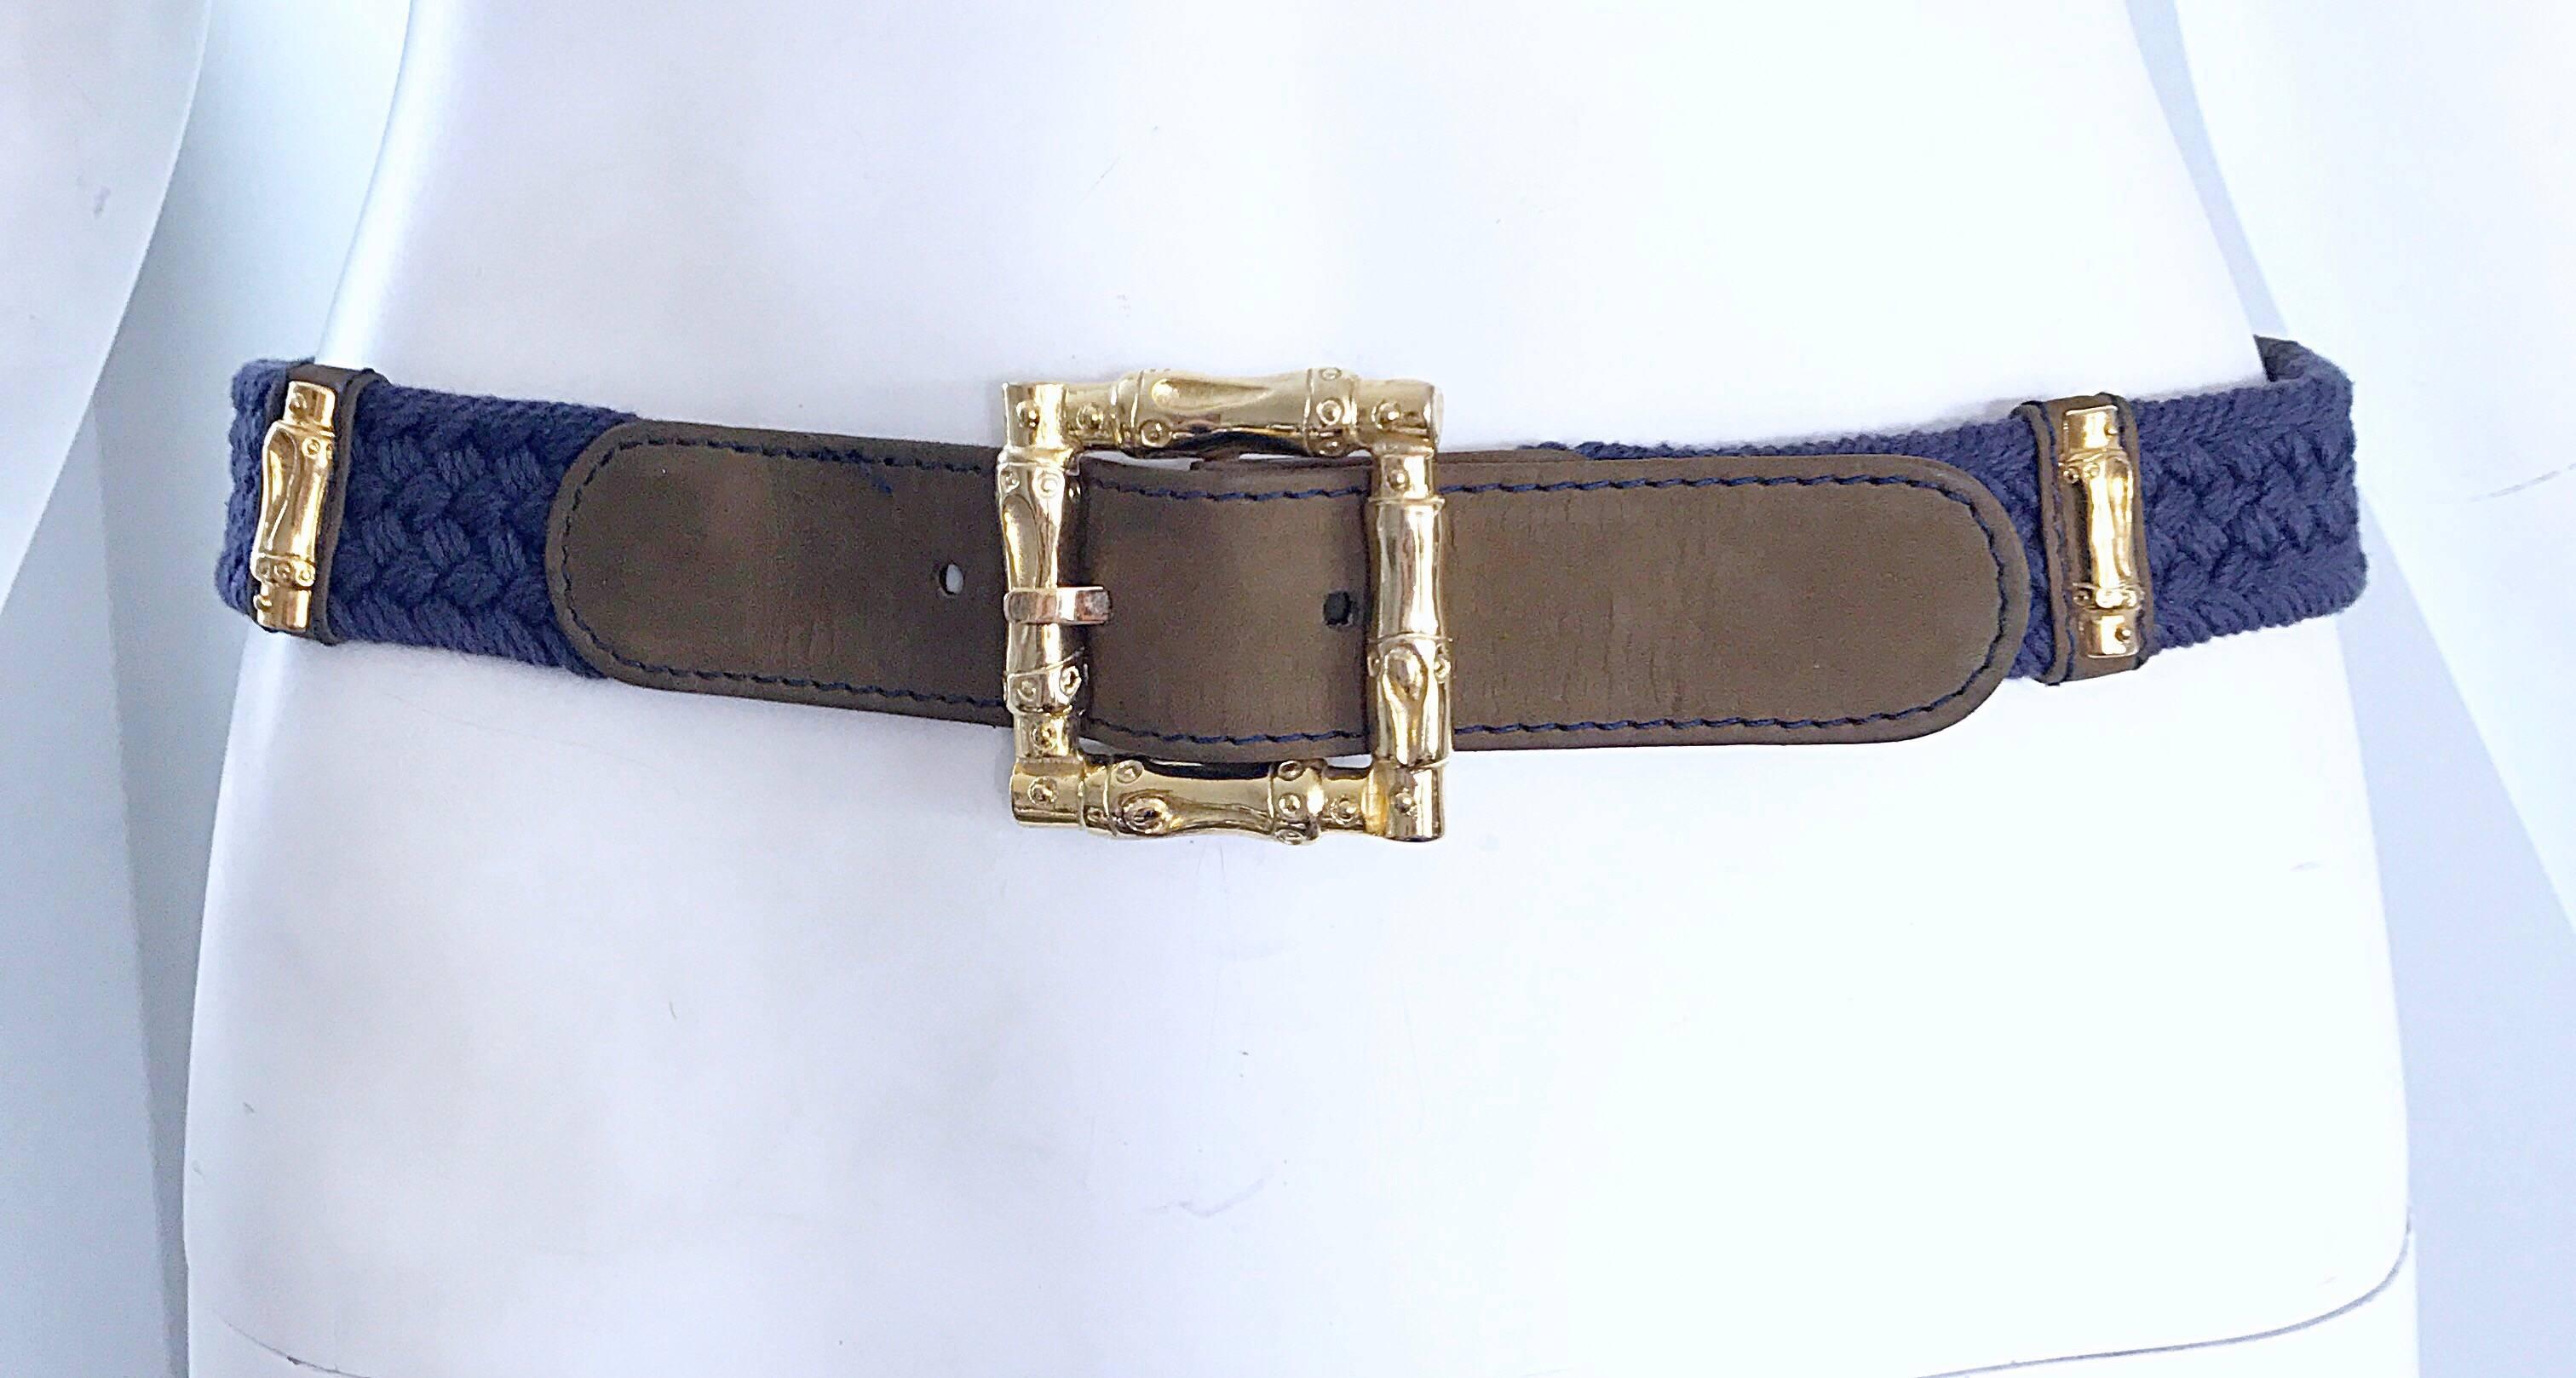 Chic vintage 90s ESCADA by MARGAREHTA LEY navy blue, gold, and brown nautical 'bamboo bit' belt! Features a braided navy blue rayon/cotton blend, base, with gold metal bamboo shaped bits, and brown suede leather. Great with jeans, white trousers, a